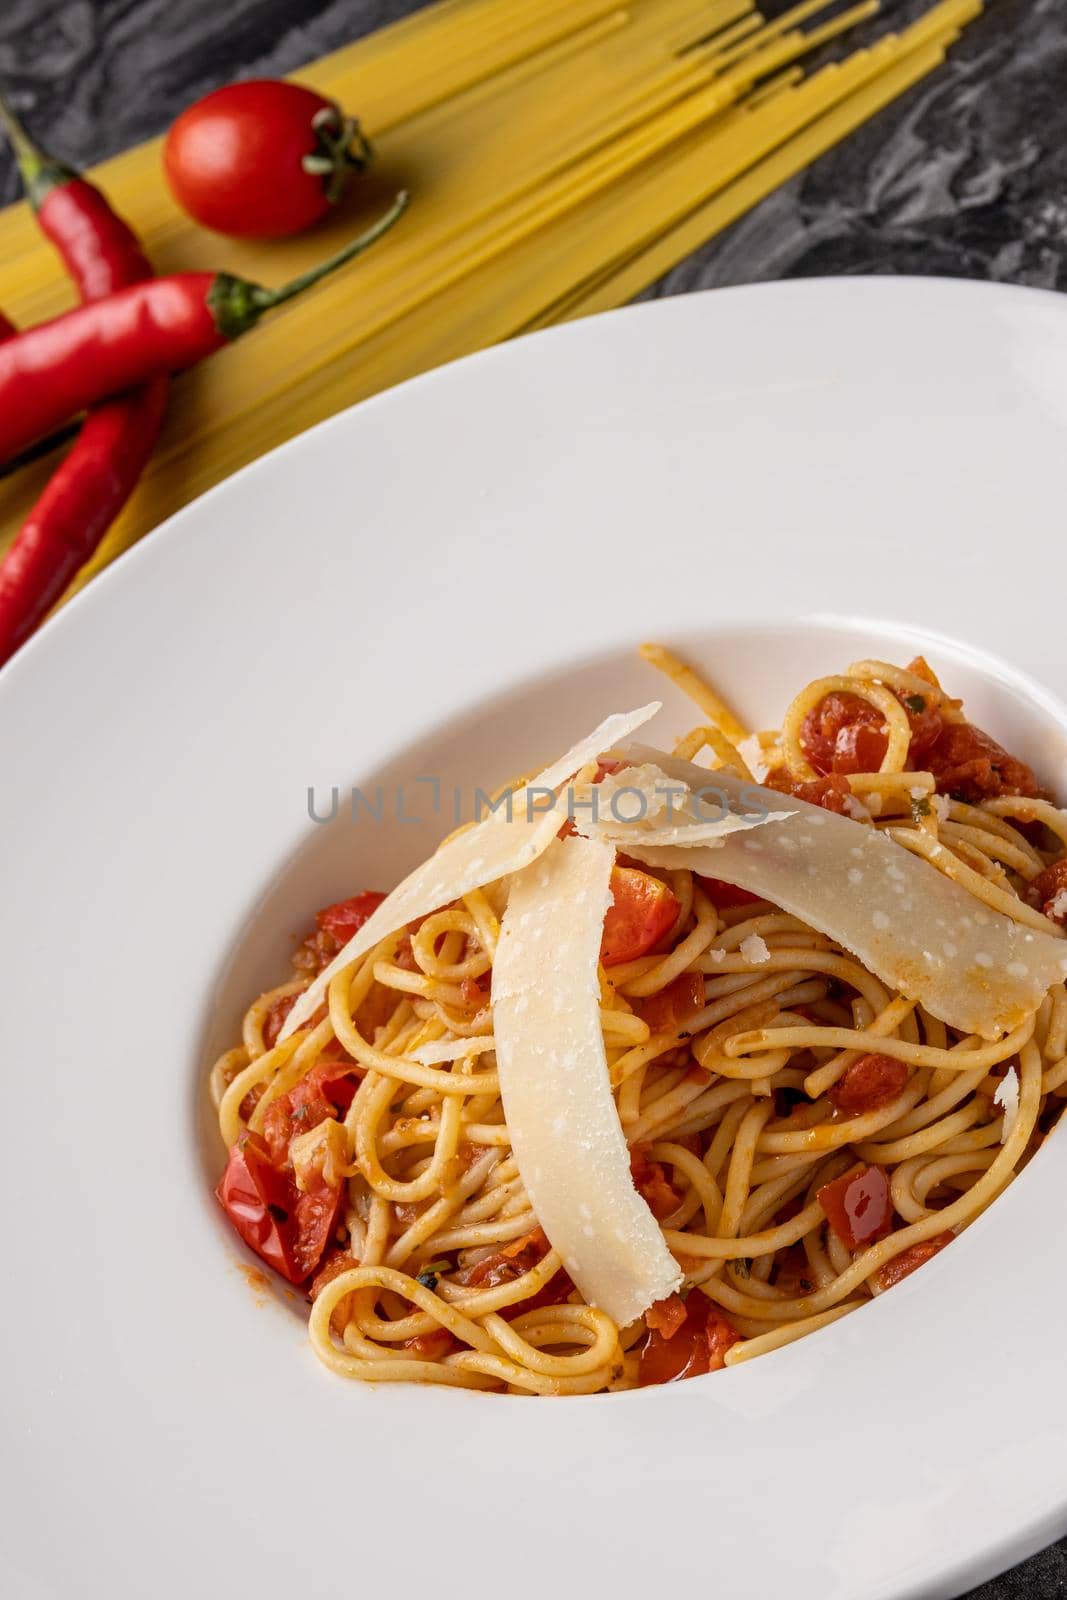 Spaghetti with a spicy sauce, chili pepper and grated parmesan cheese